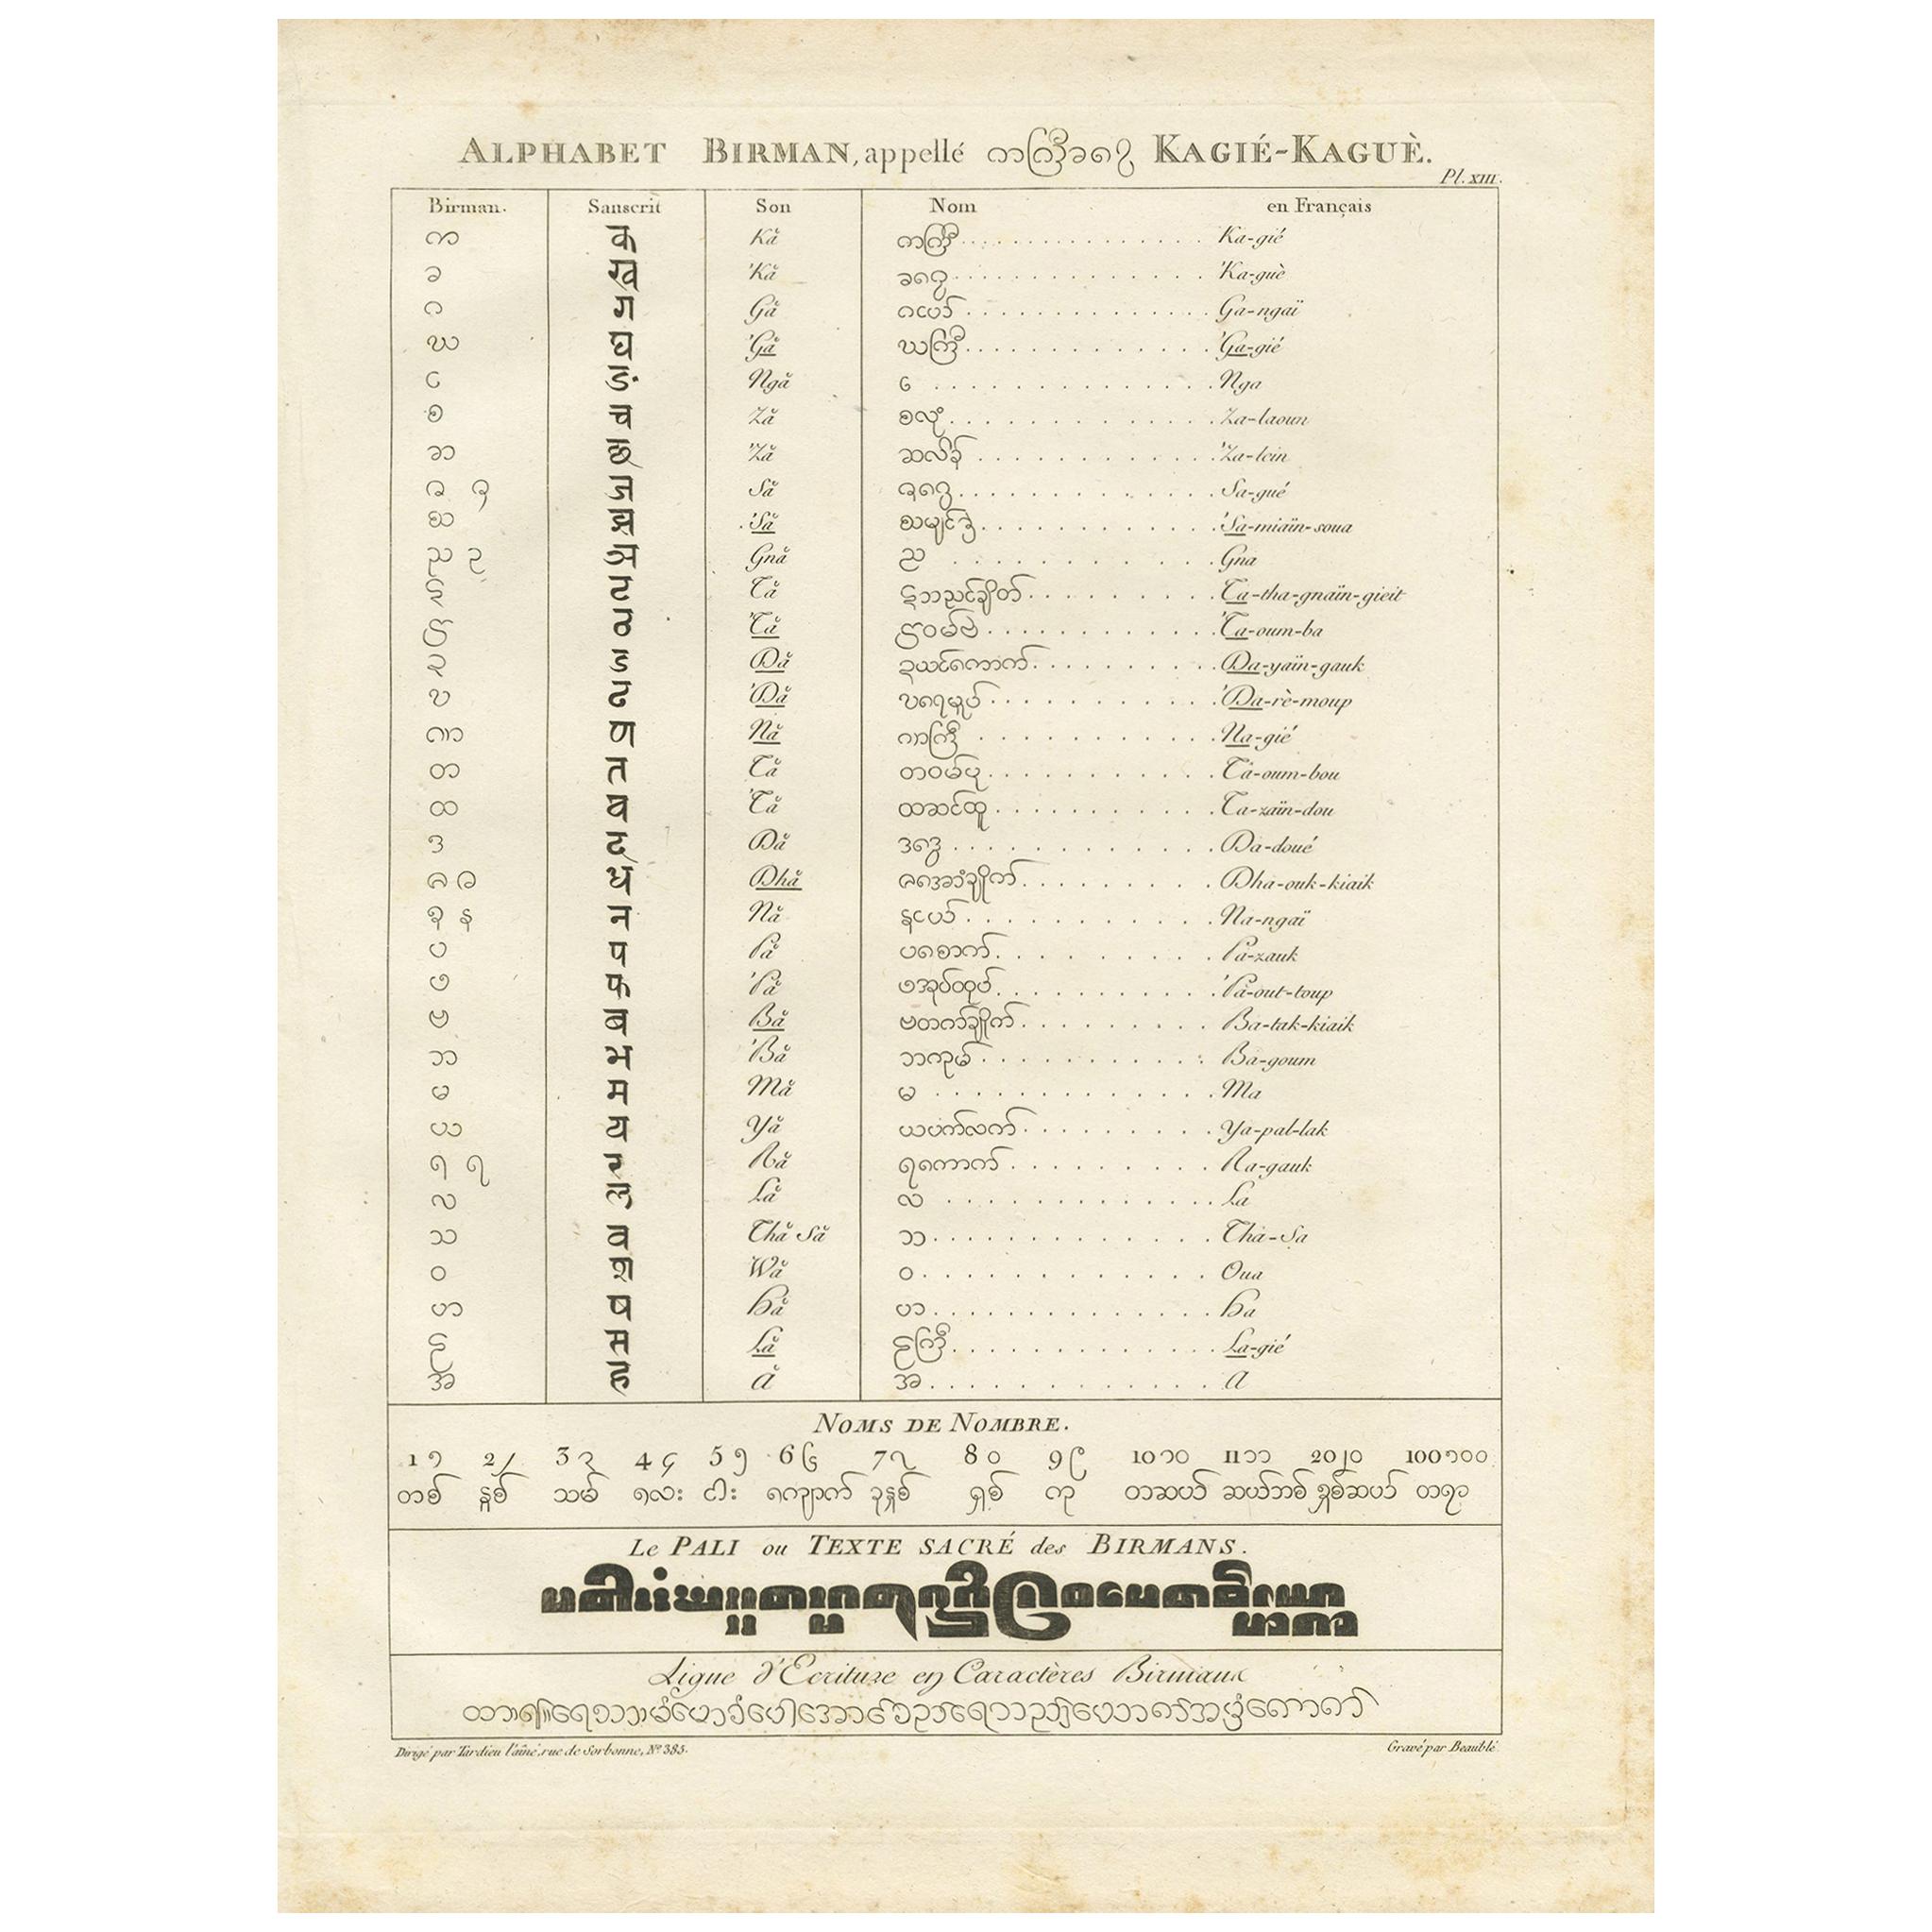 Antique Print of the Burmese Alphabet by Symes, 1800